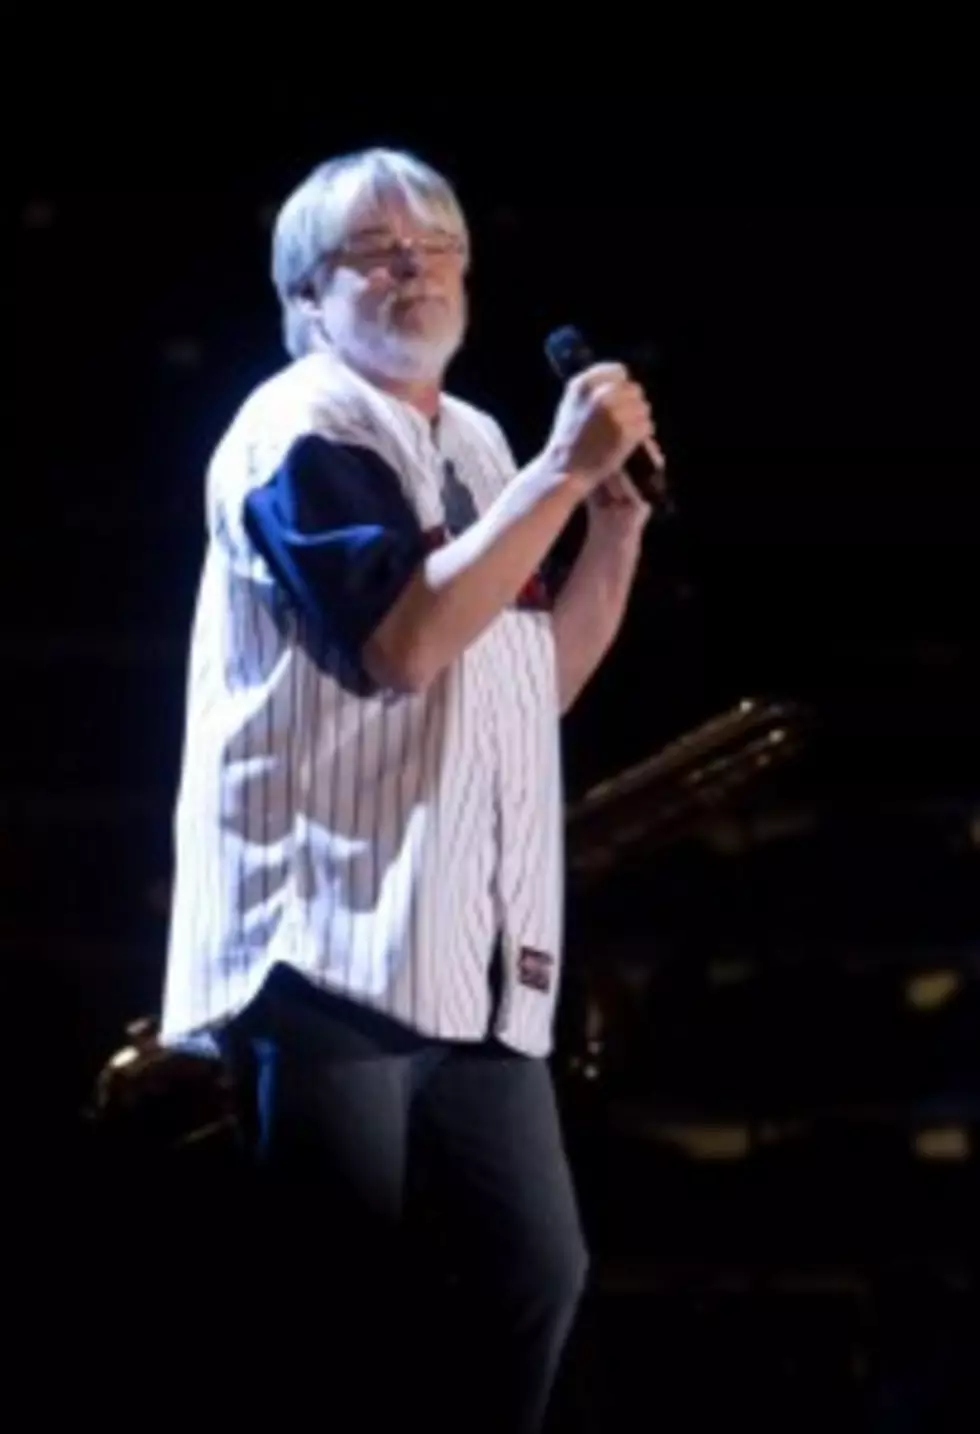 At 65, Seger Shows No Signs of Slowing Down &#8211; Sold-Out Saginaw Show a Crowd-Pleaser